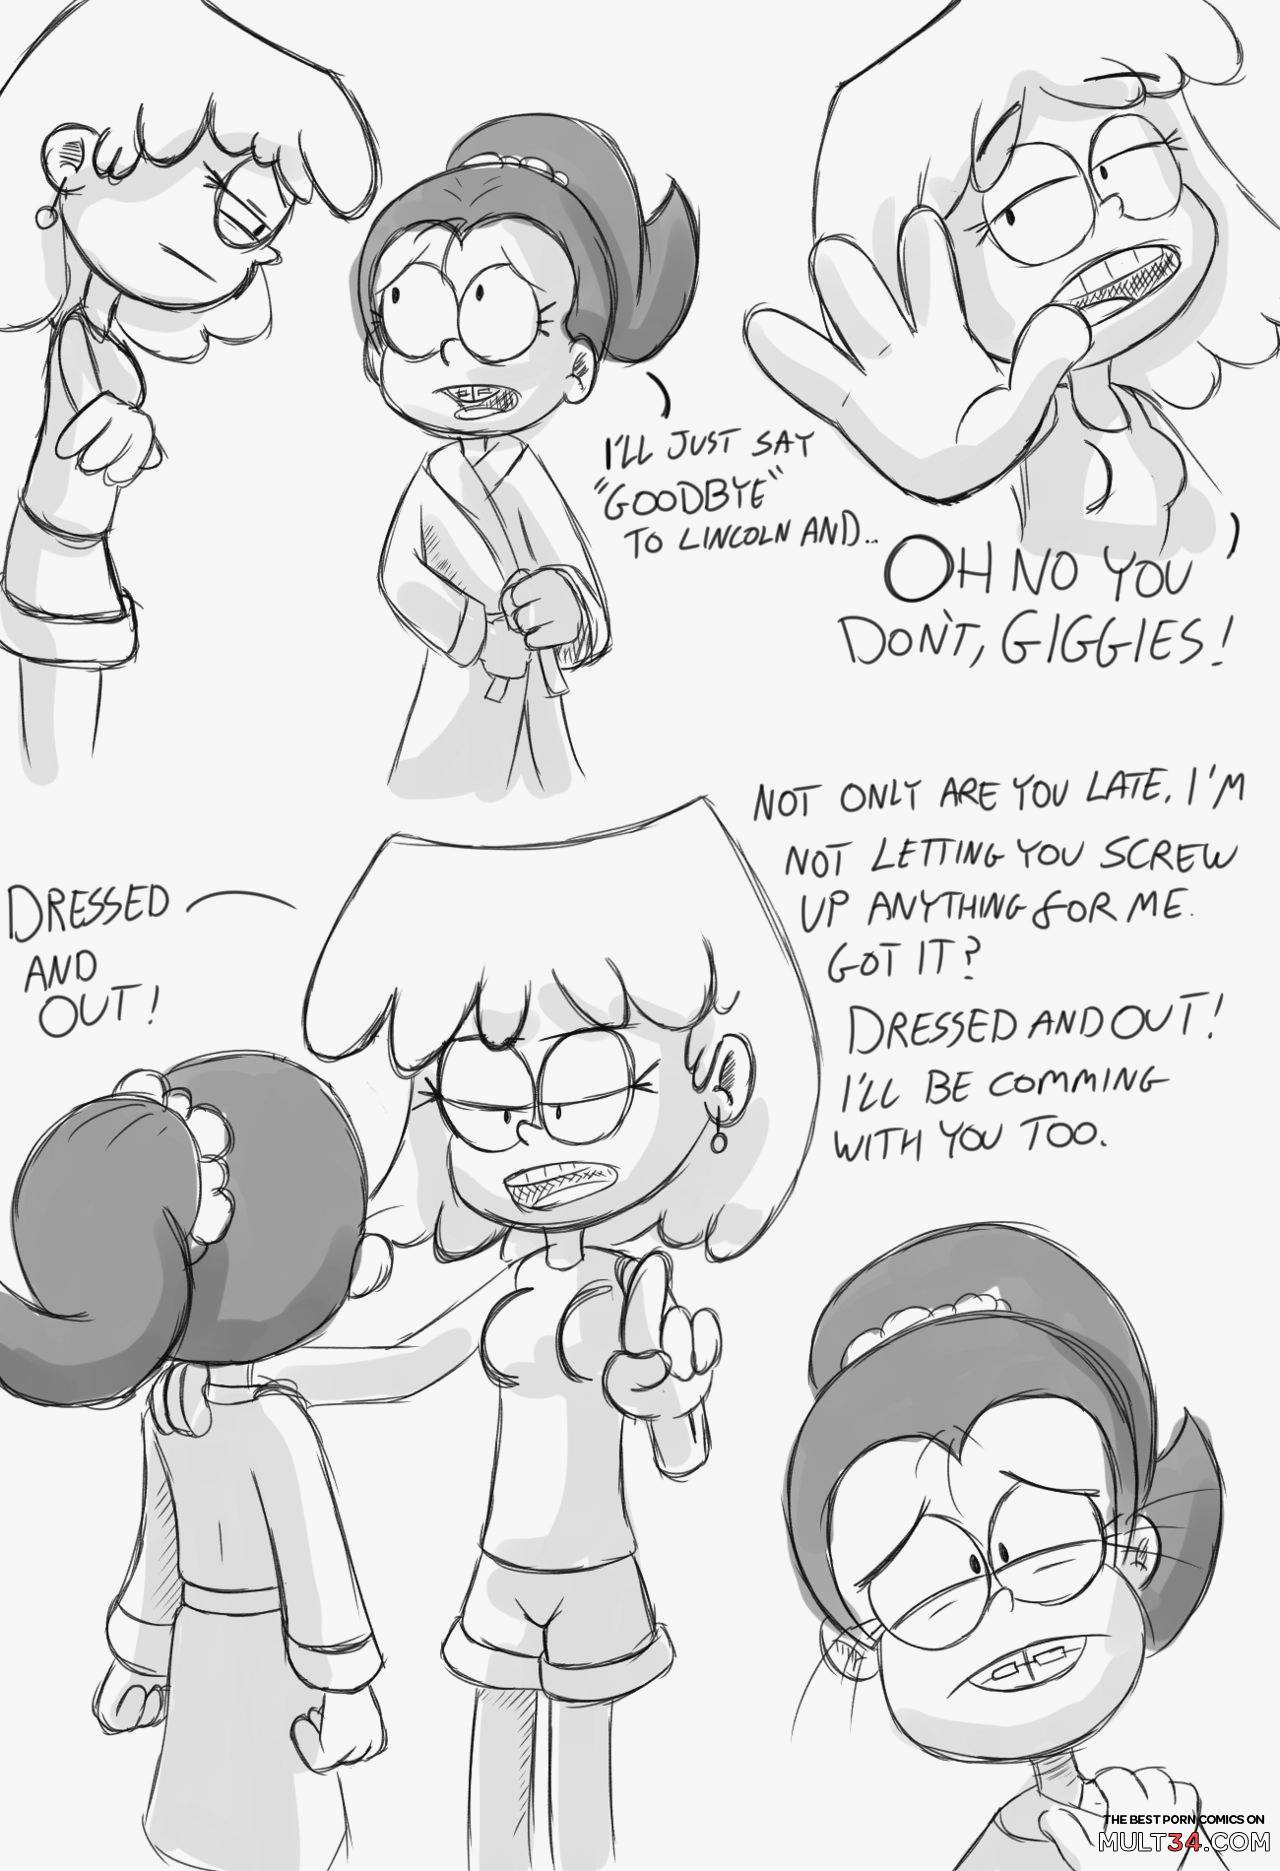 The loud house comic, chapter 2 page 4